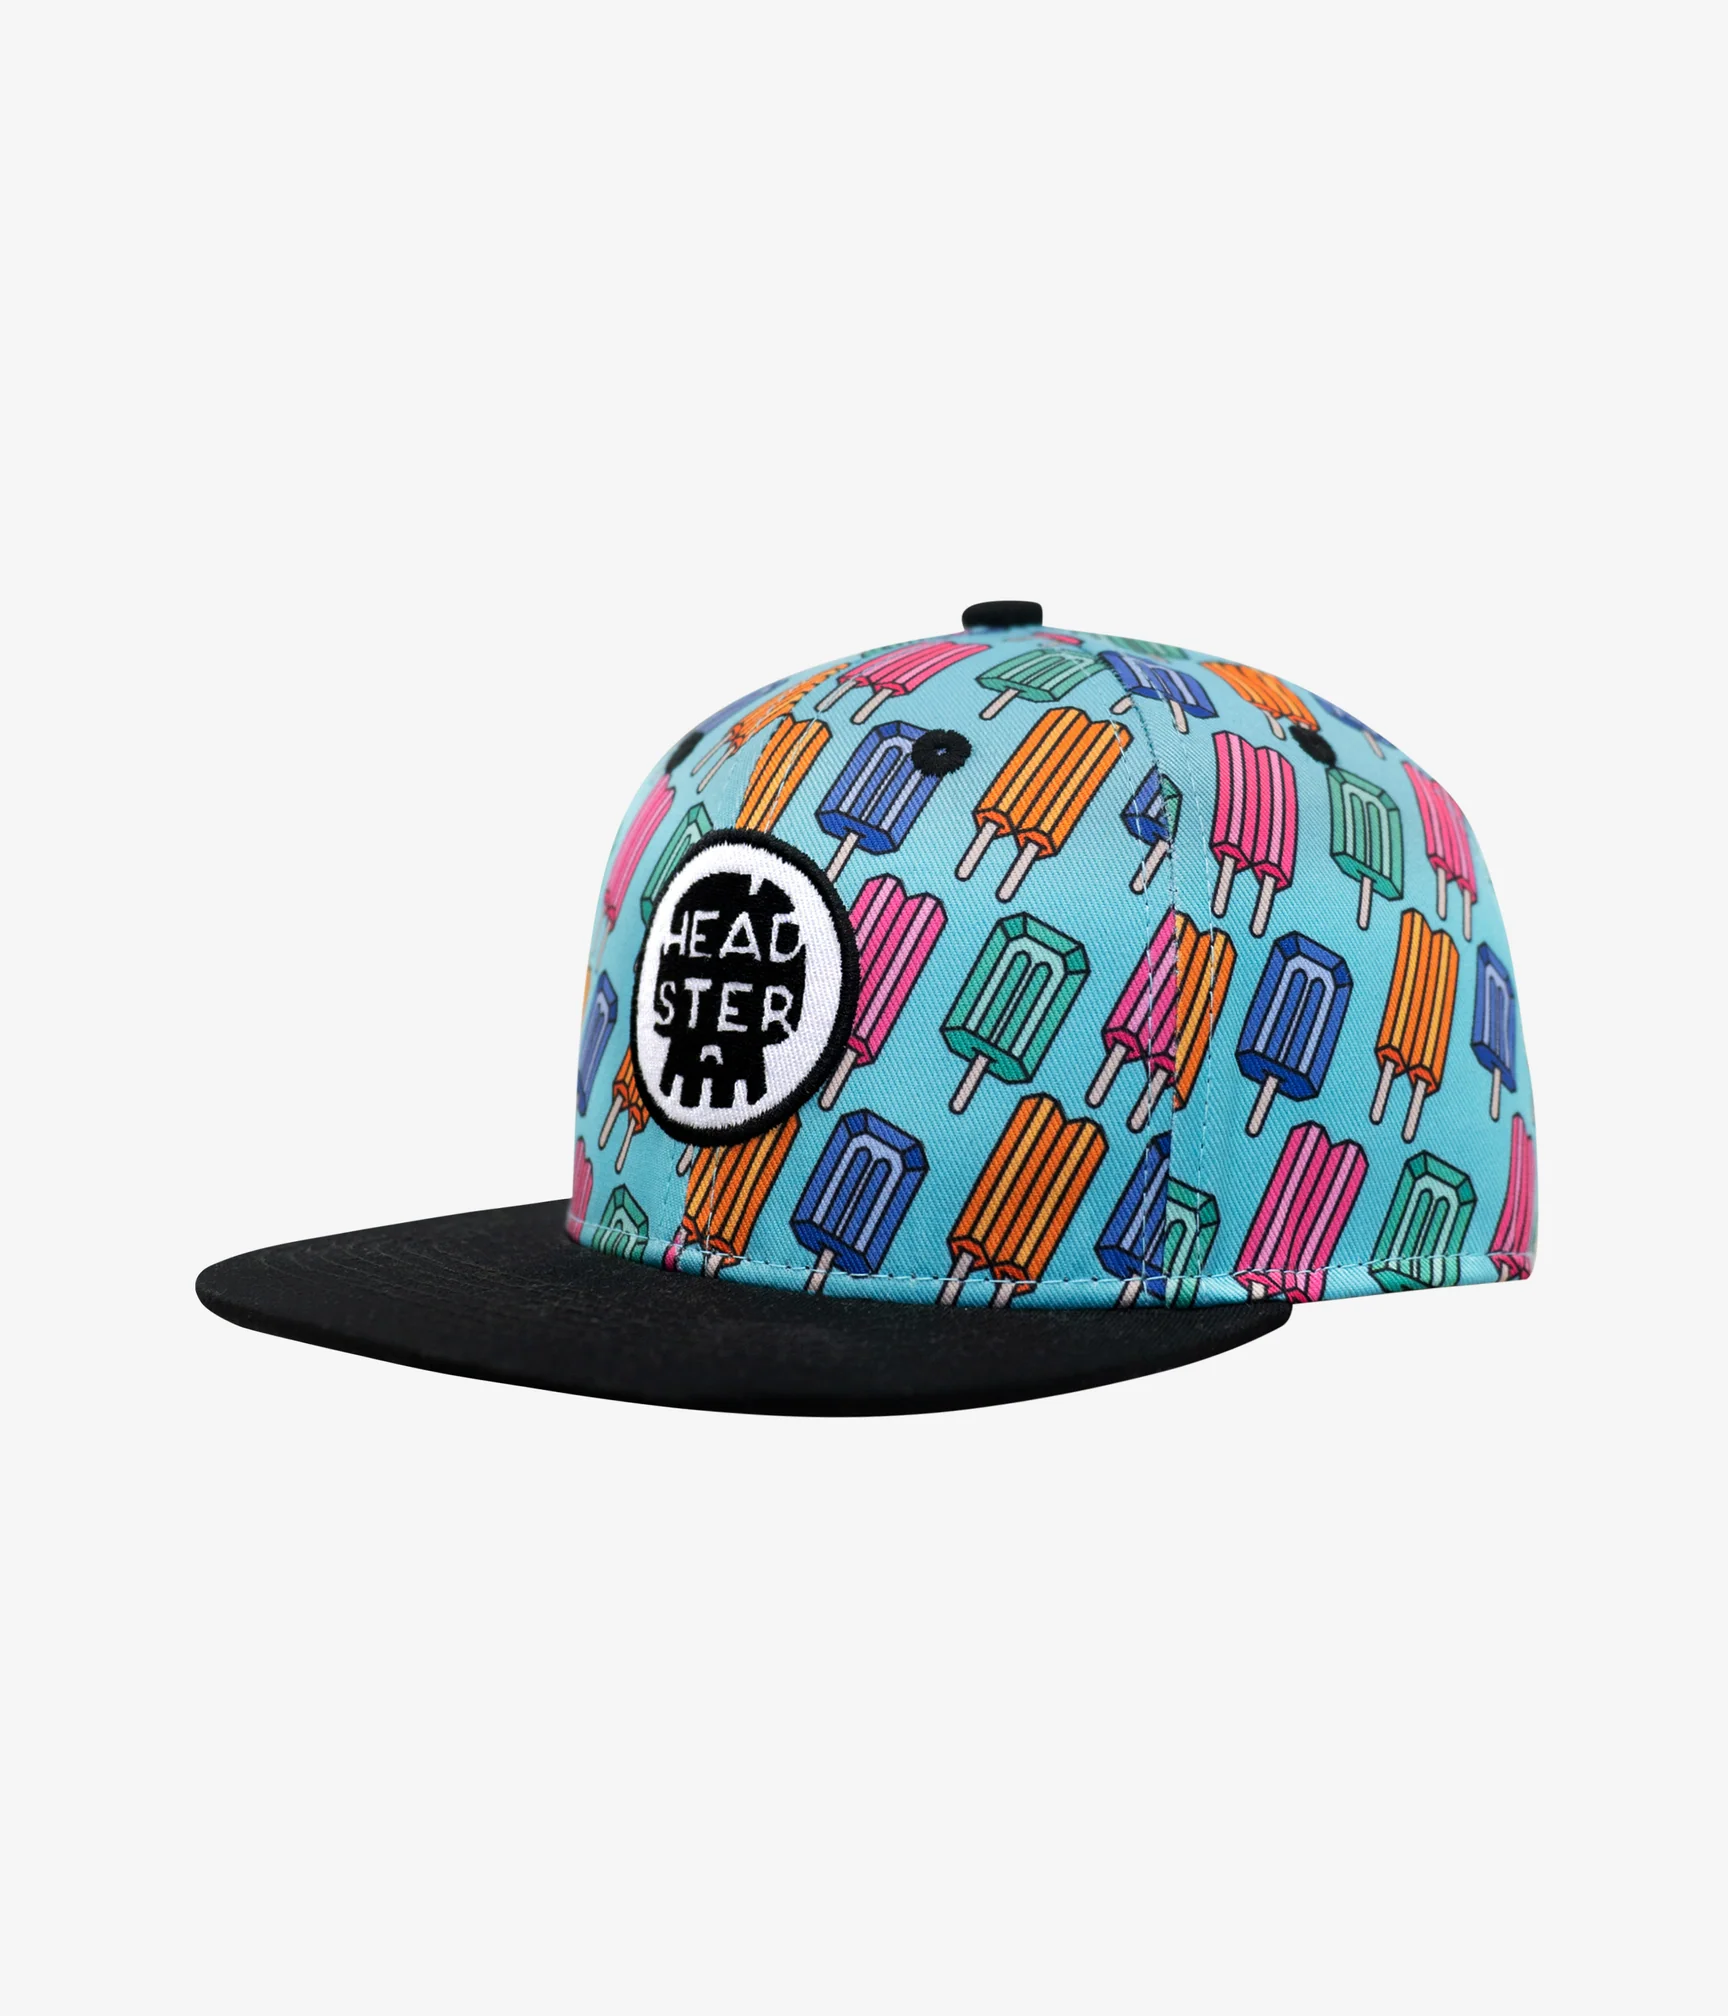 Headster Headster Snapback Caps